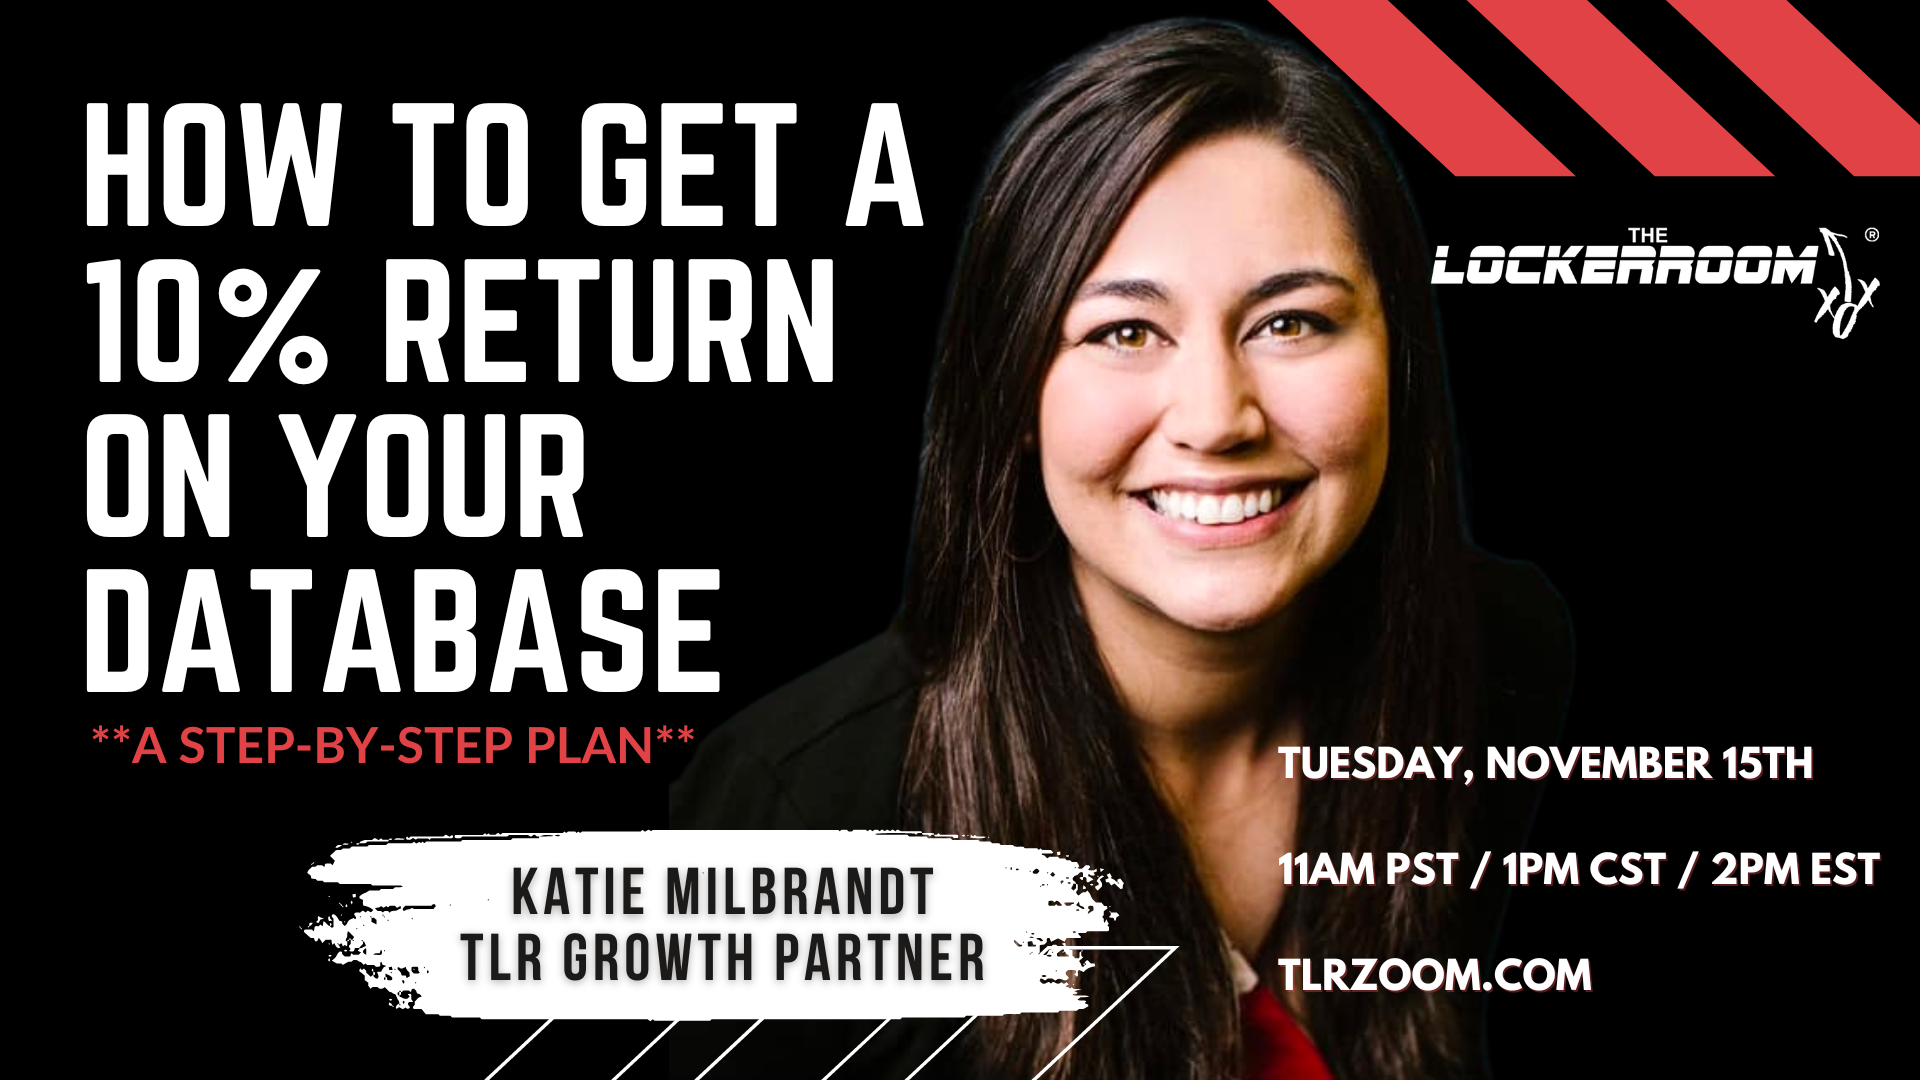 
TLR: How to get a 10% return from your database